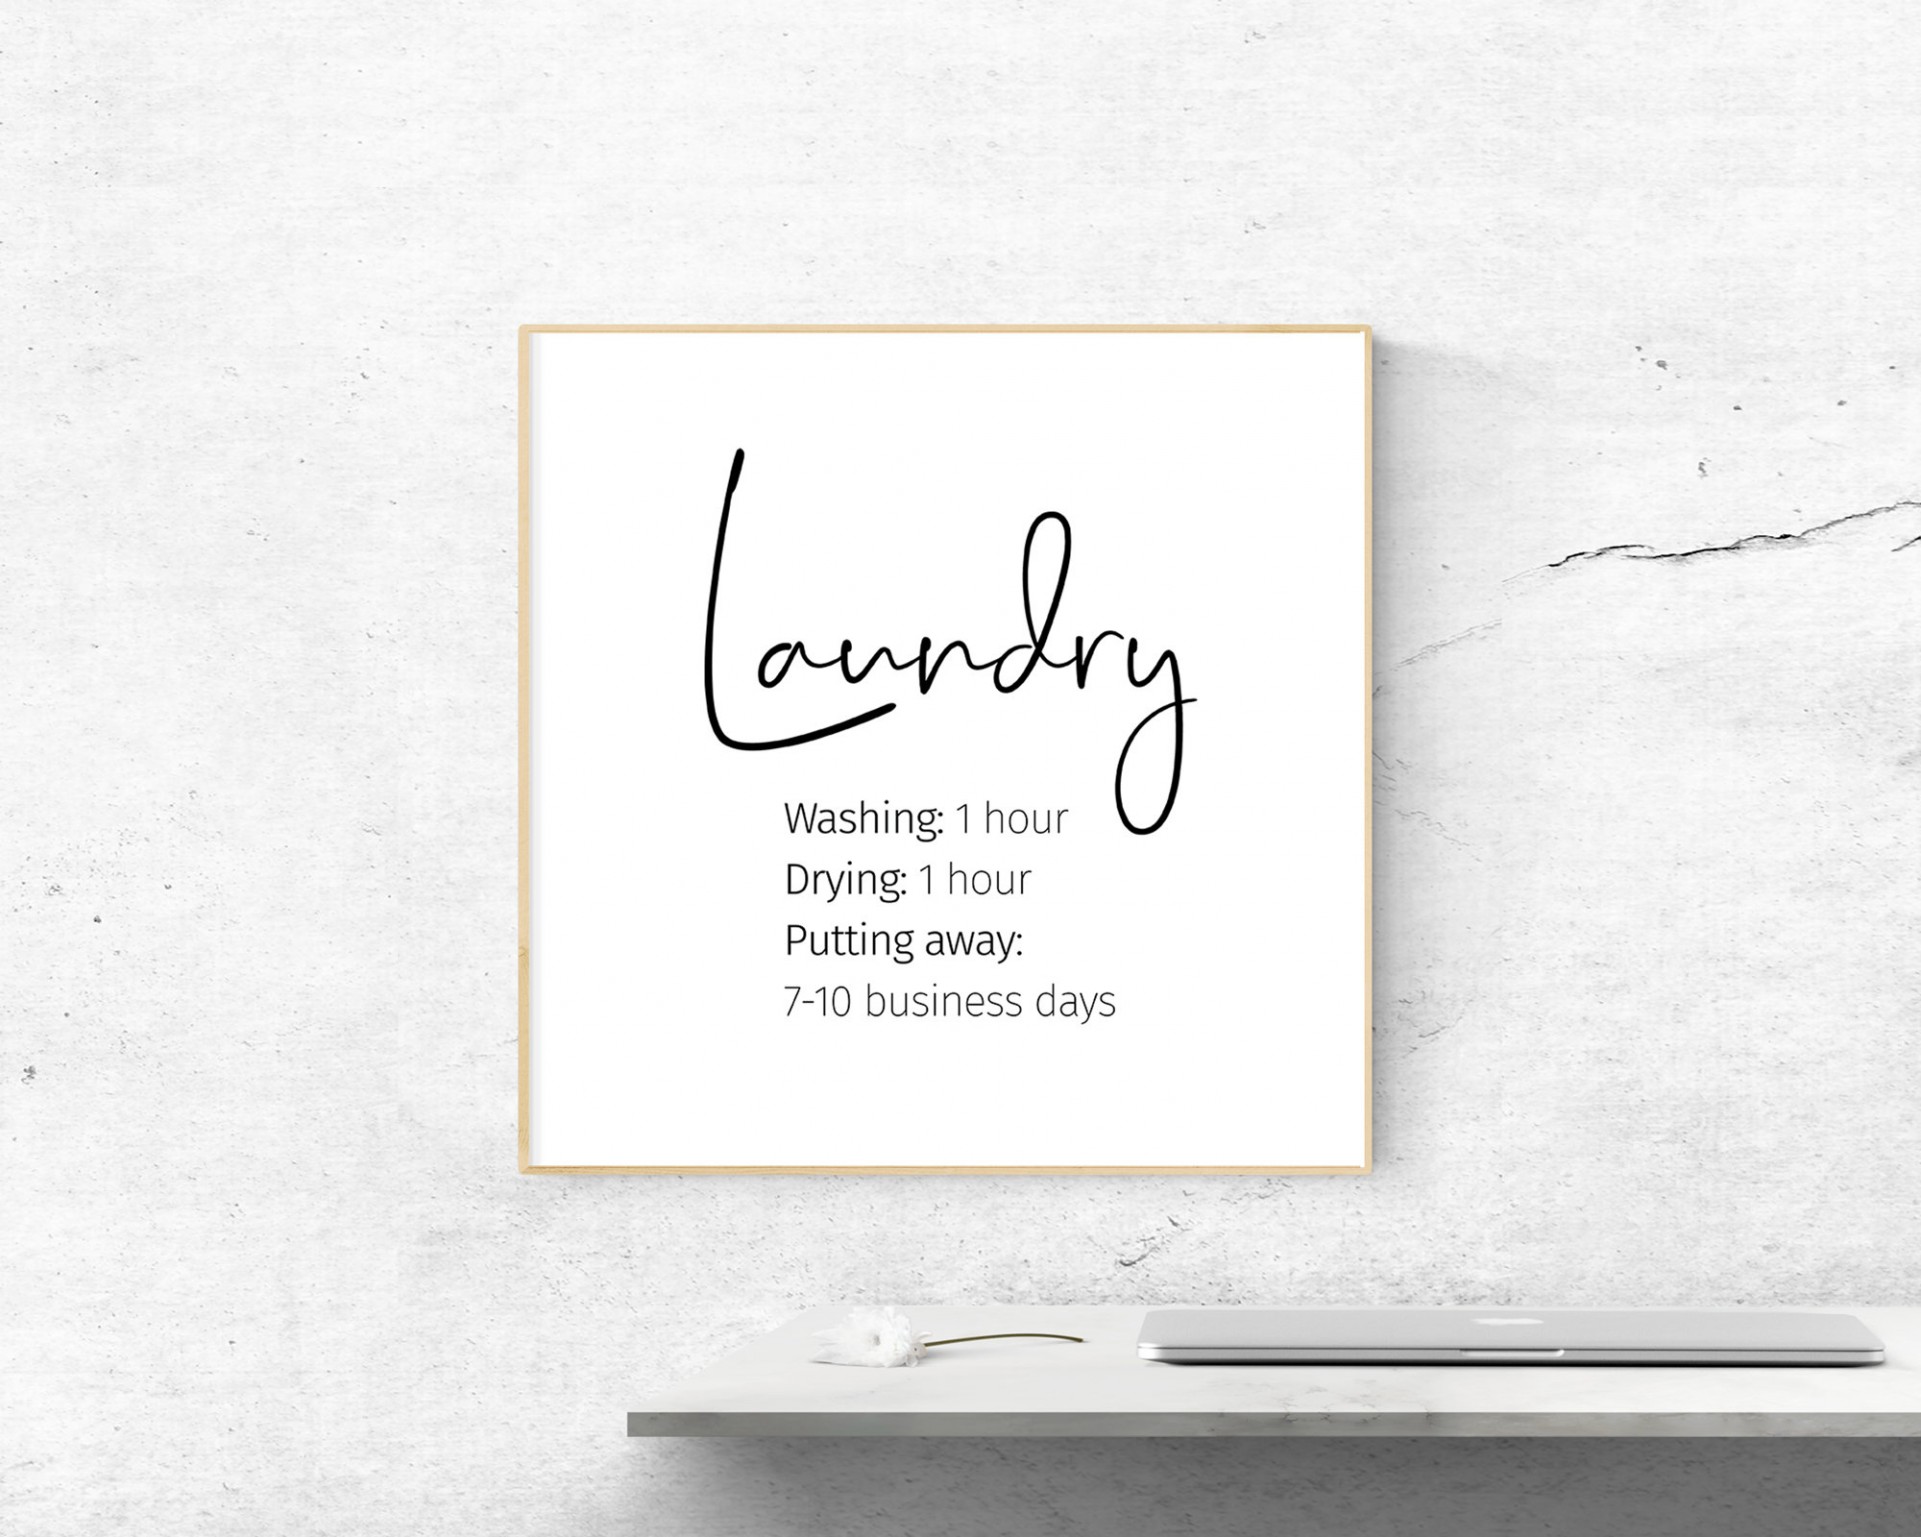 Can anyone tell me the font for "Laundry"?